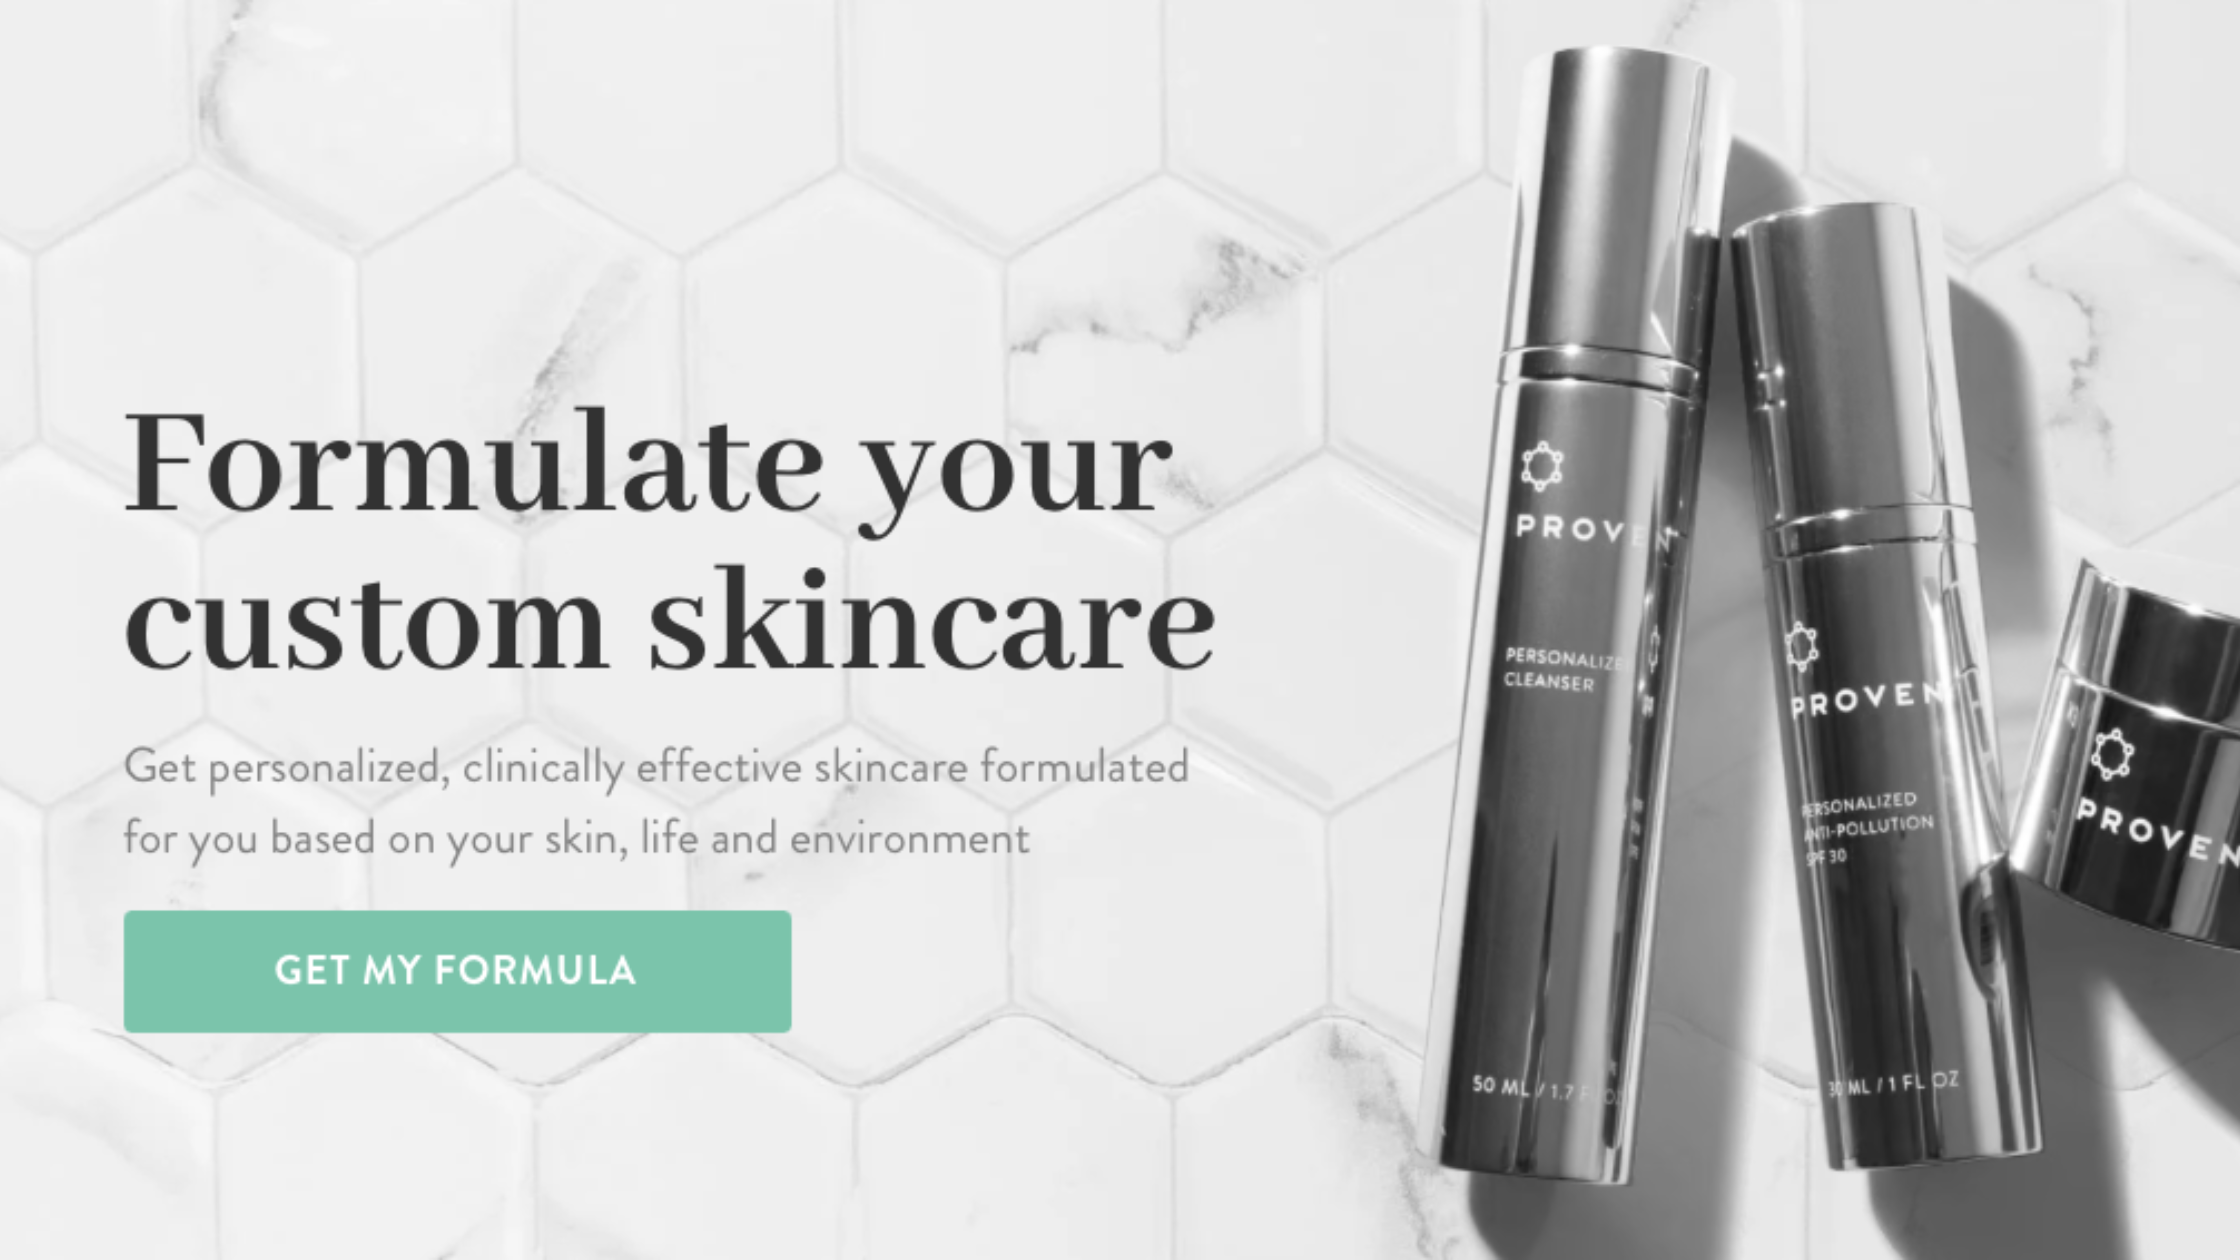 Proven Skincare will use hyper-personalization beauty trend beyond 2023 for growth